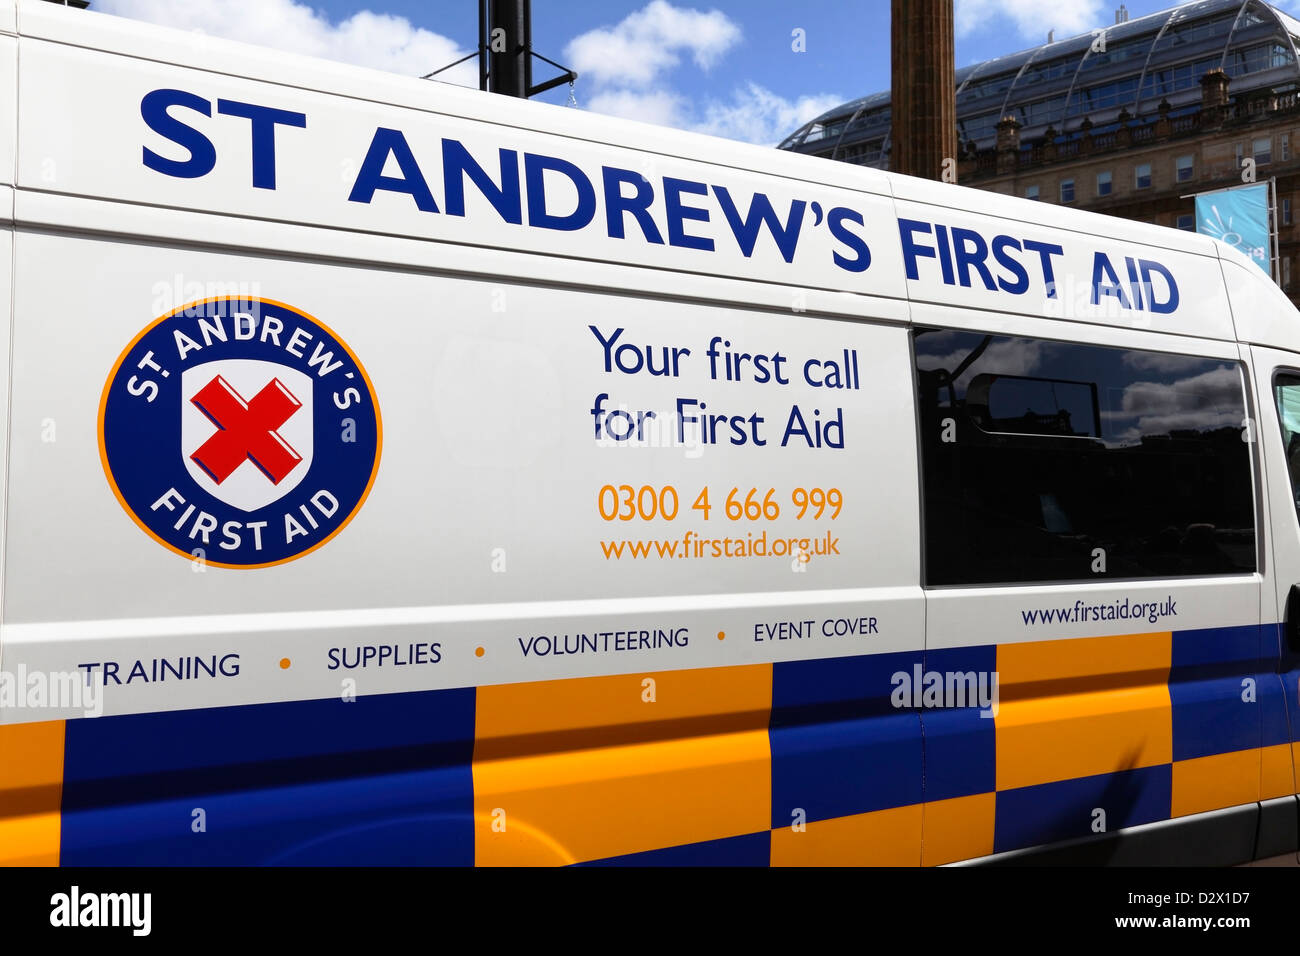 St Andrew's First Aid vehicle at an event, Scotland, UK Stock Photo